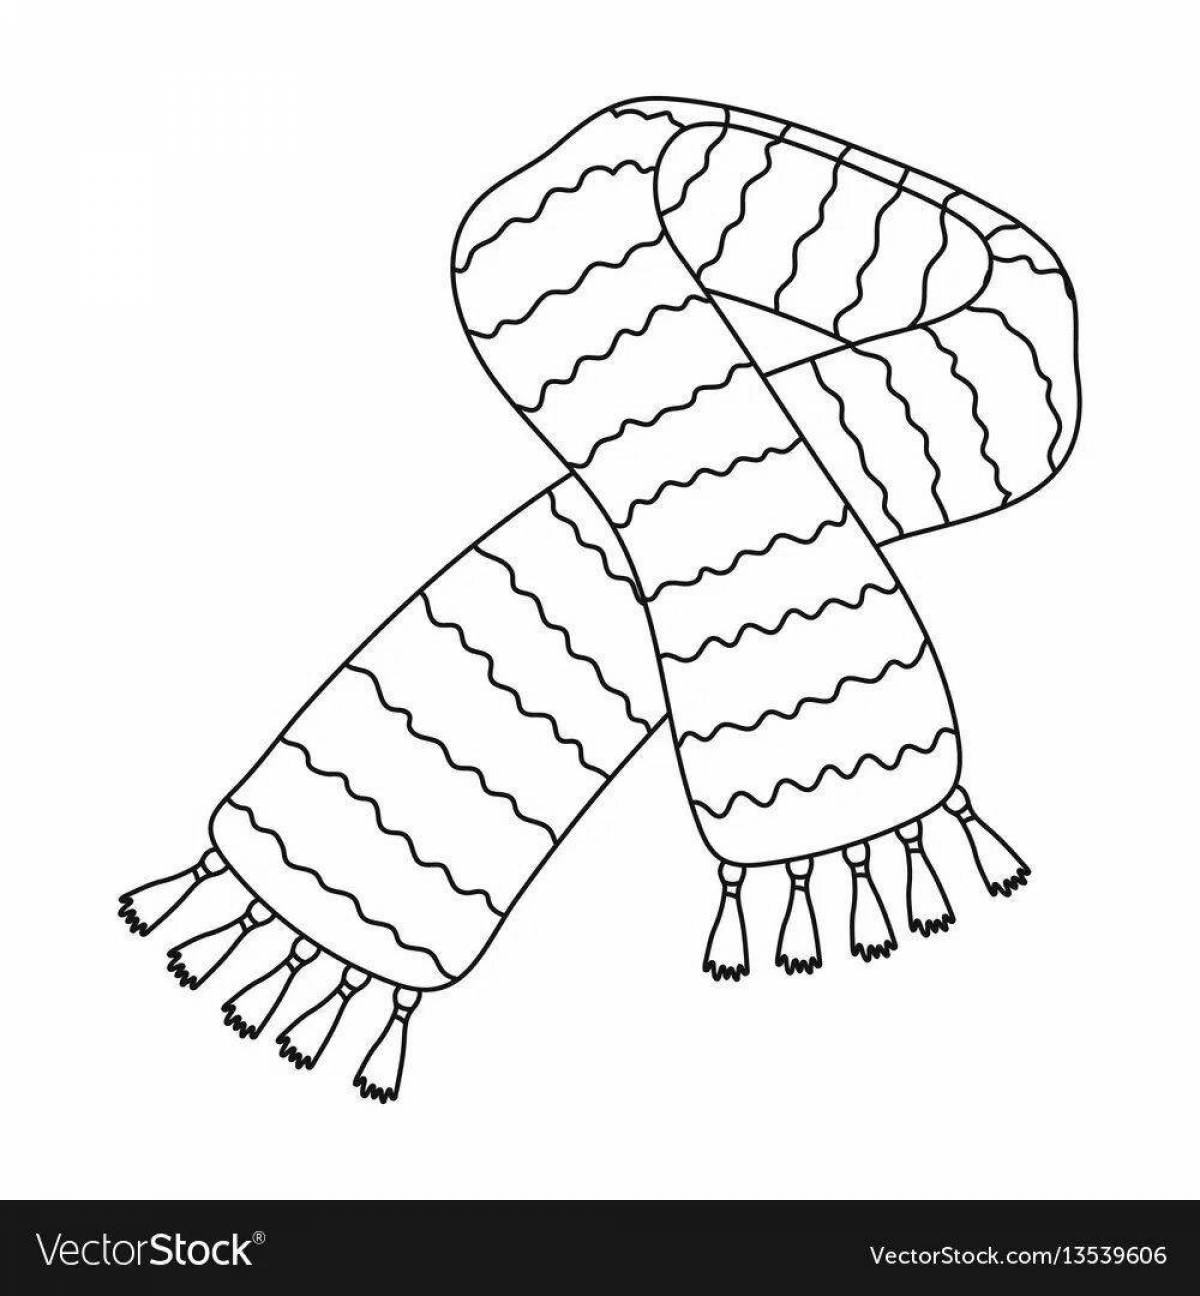 Fancy scarf coloring book for 3-4 year olds